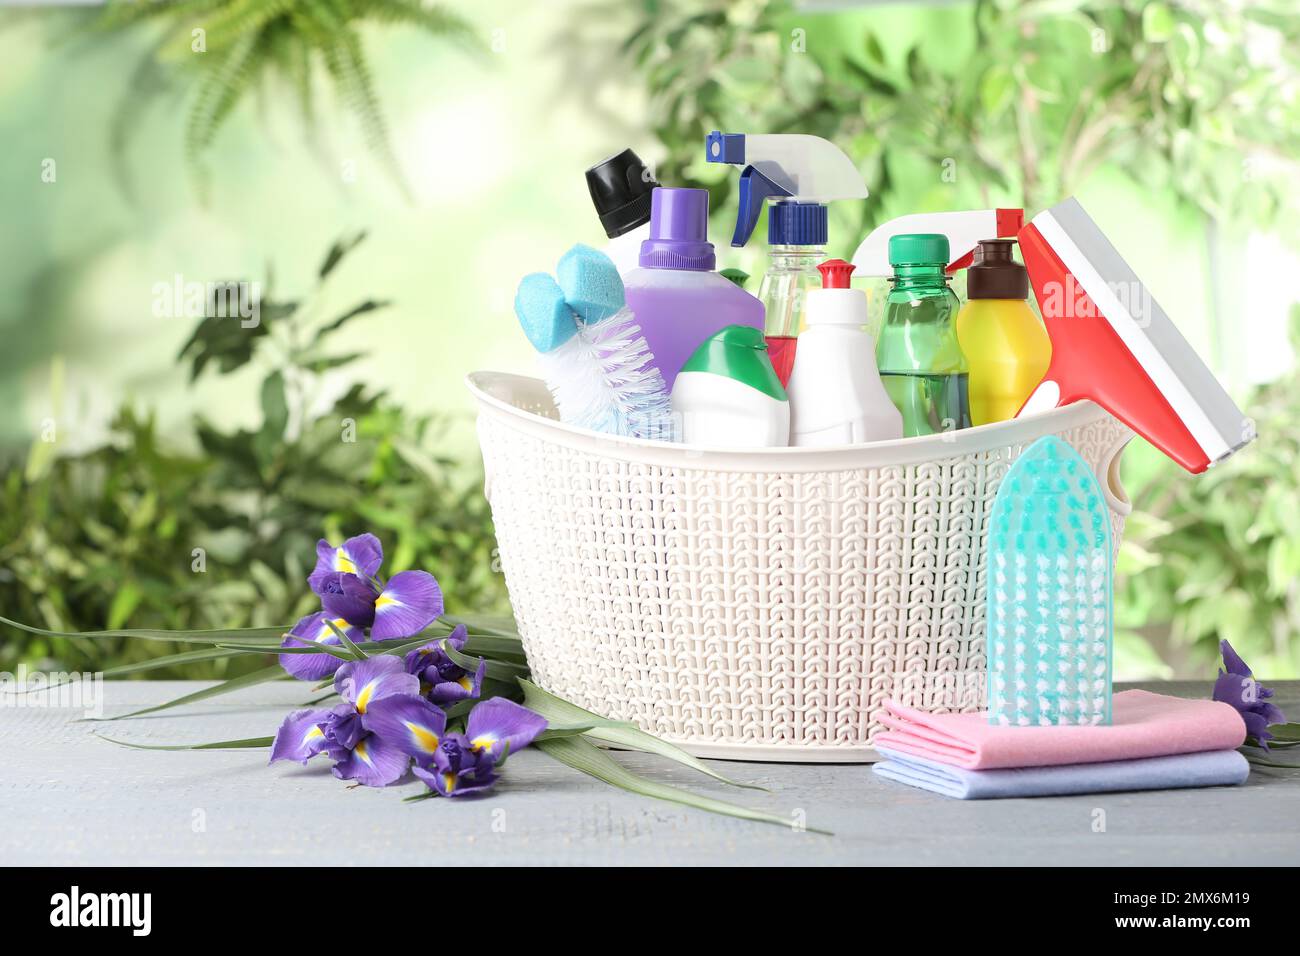 Spring flowers and cleaning supplies on light wooden table Stock Photo